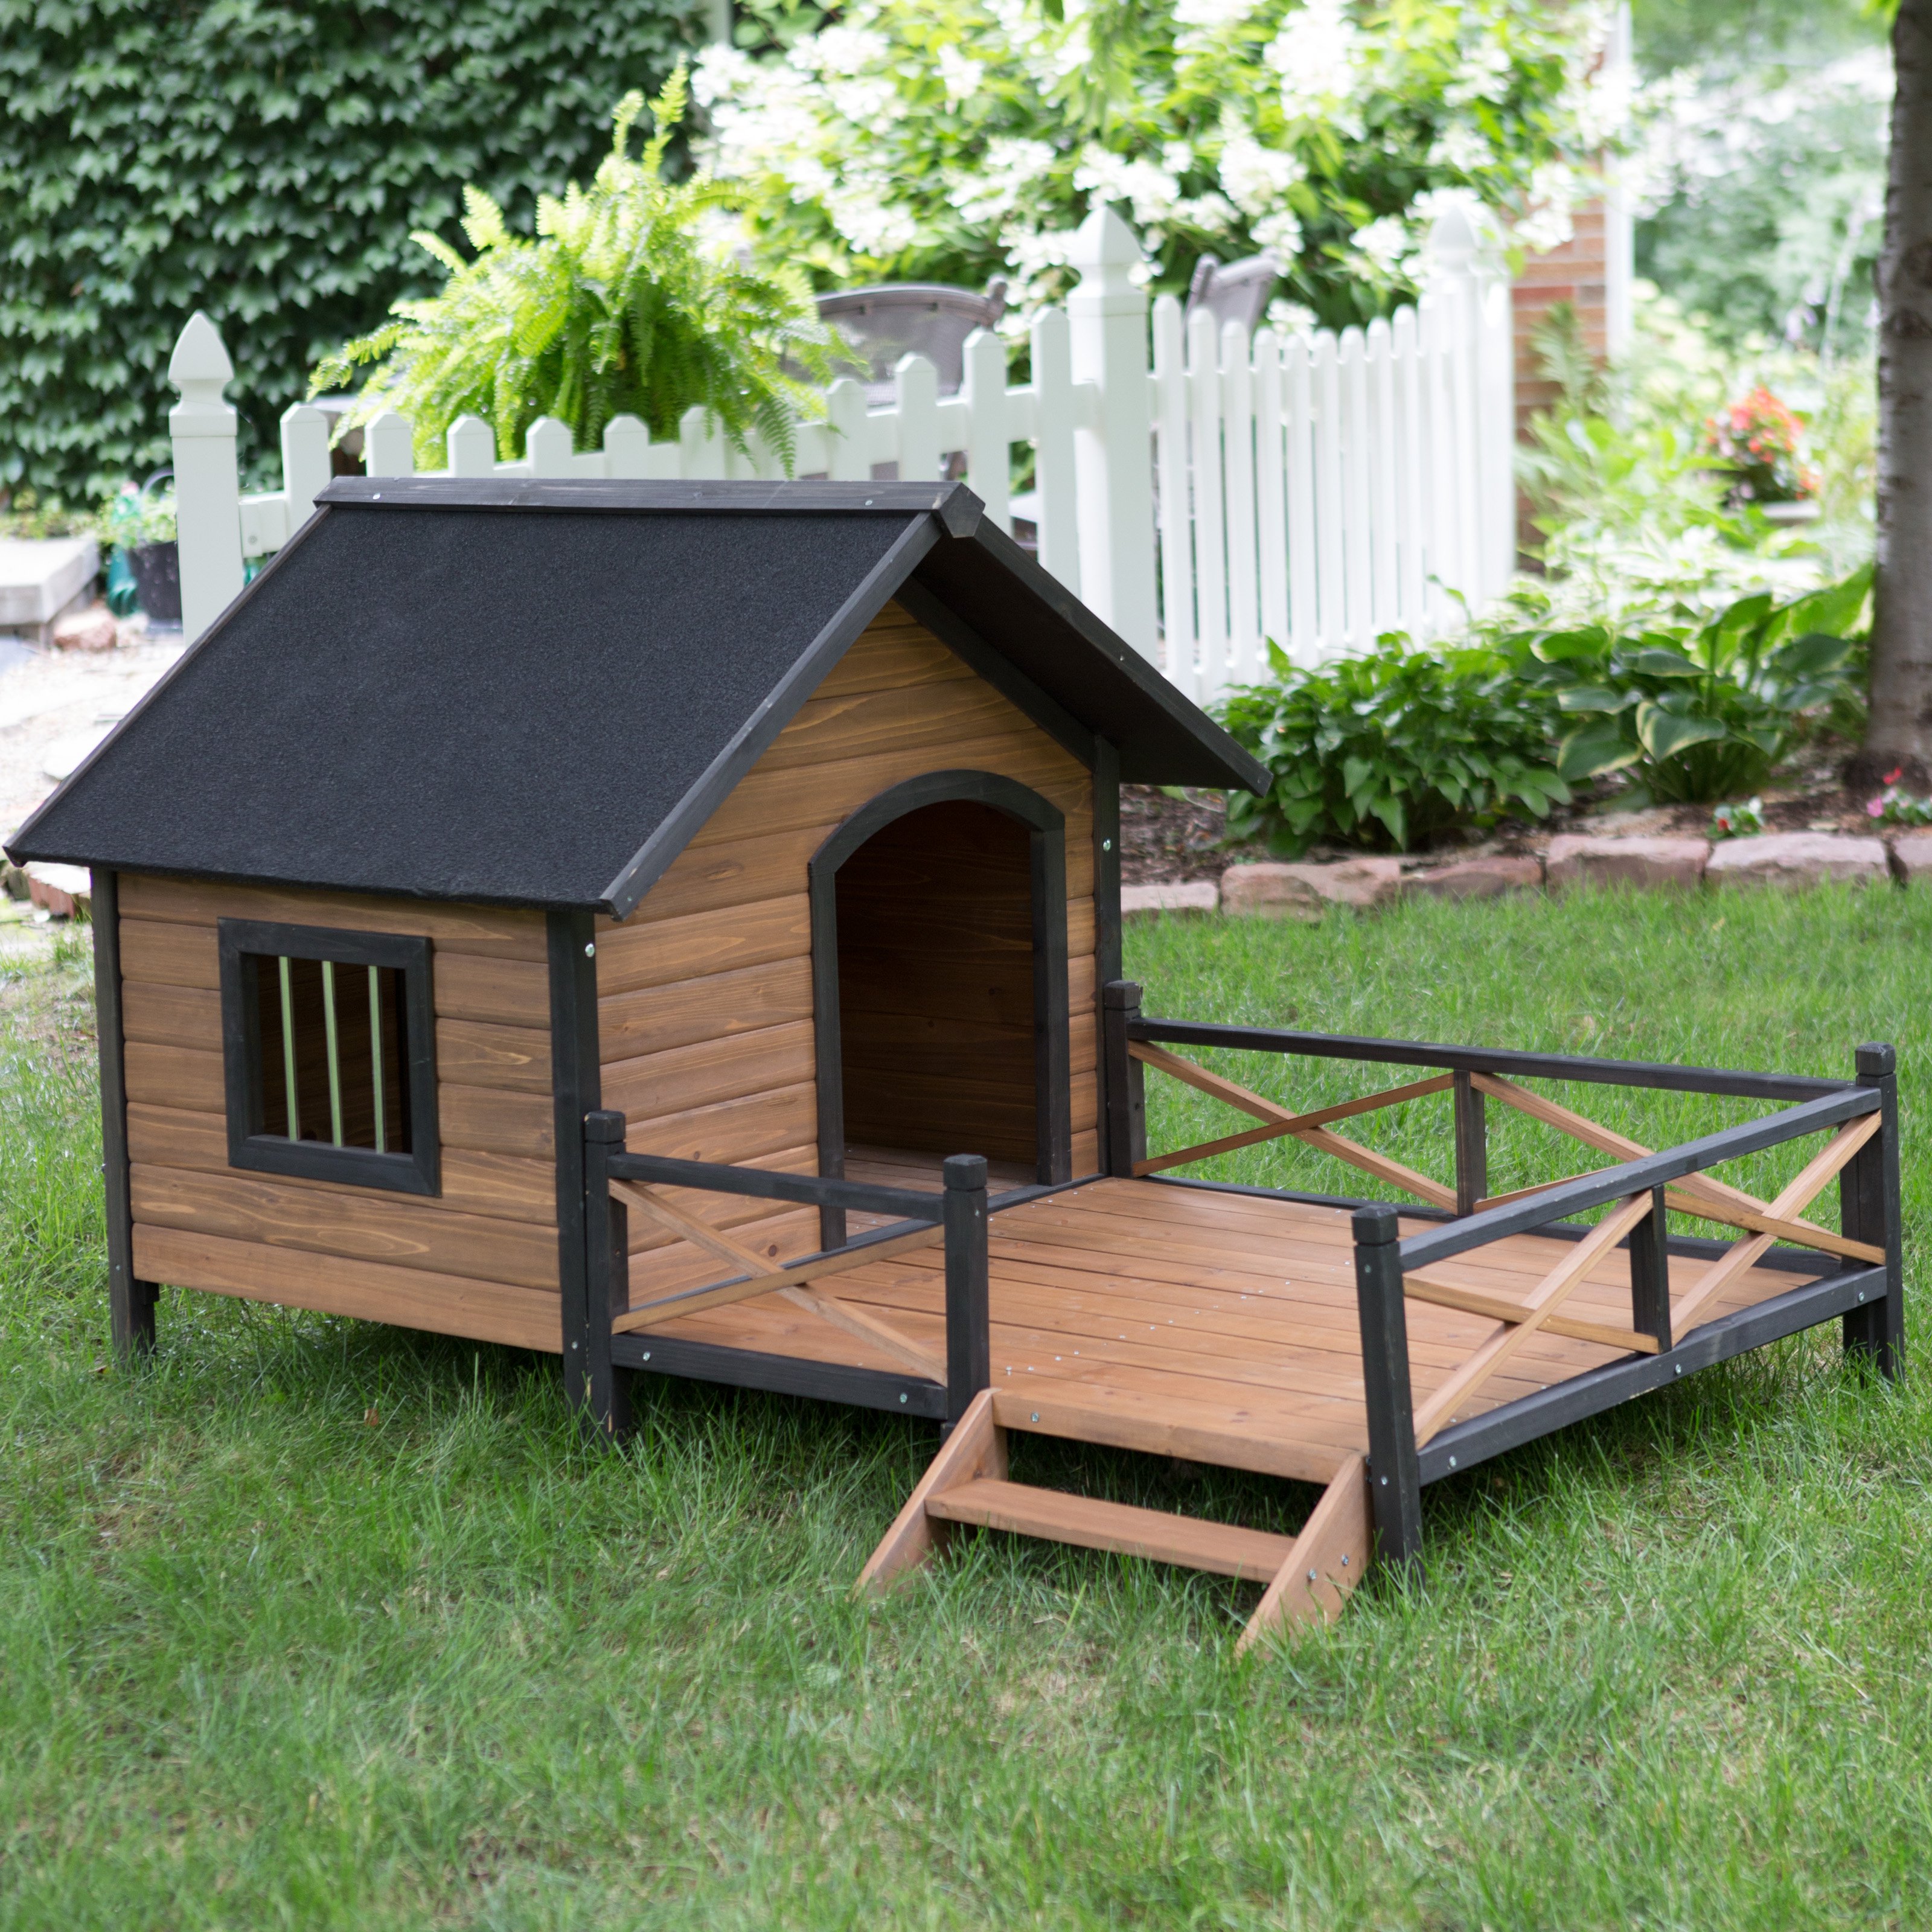 Luxury Dog Houses By Lapetitemaison Com Pictures to pin on Pinterest